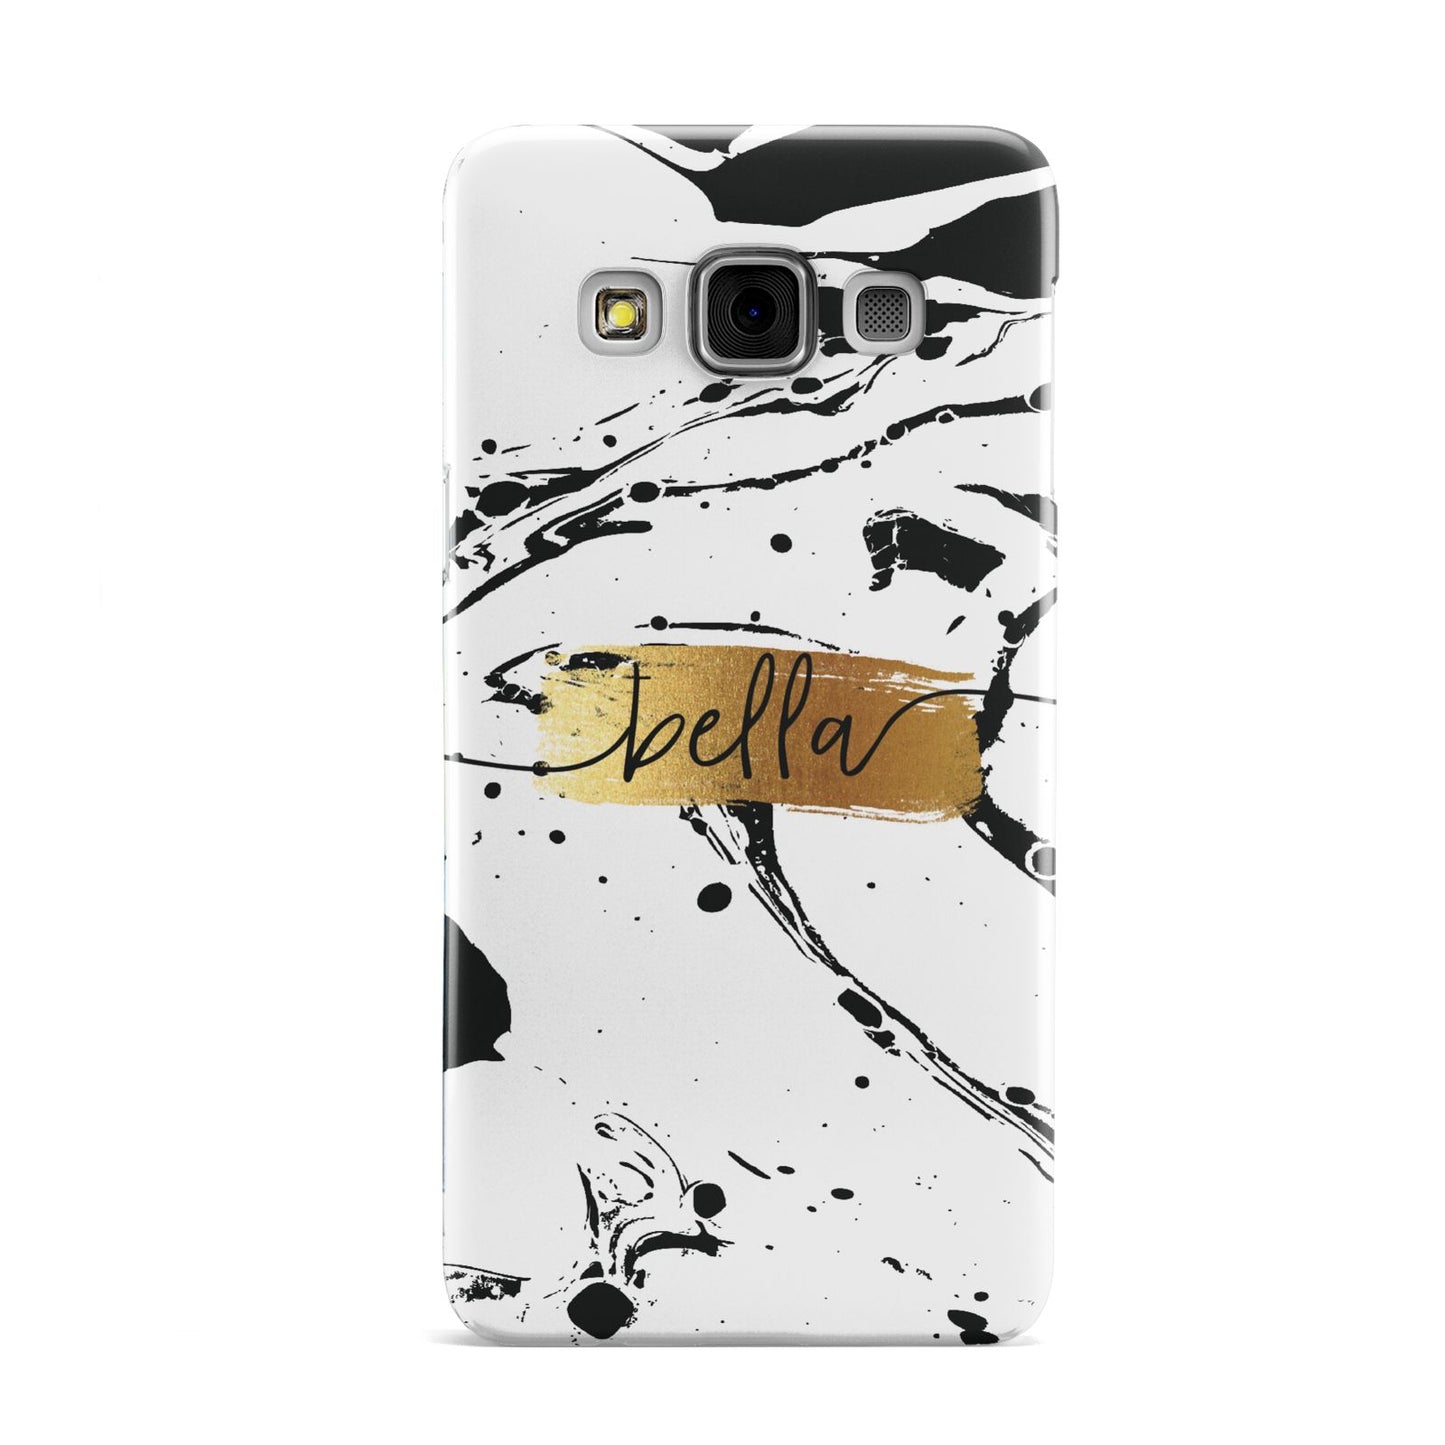 Personalised White Gold Swirl Marble Samsung Galaxy A3 Case